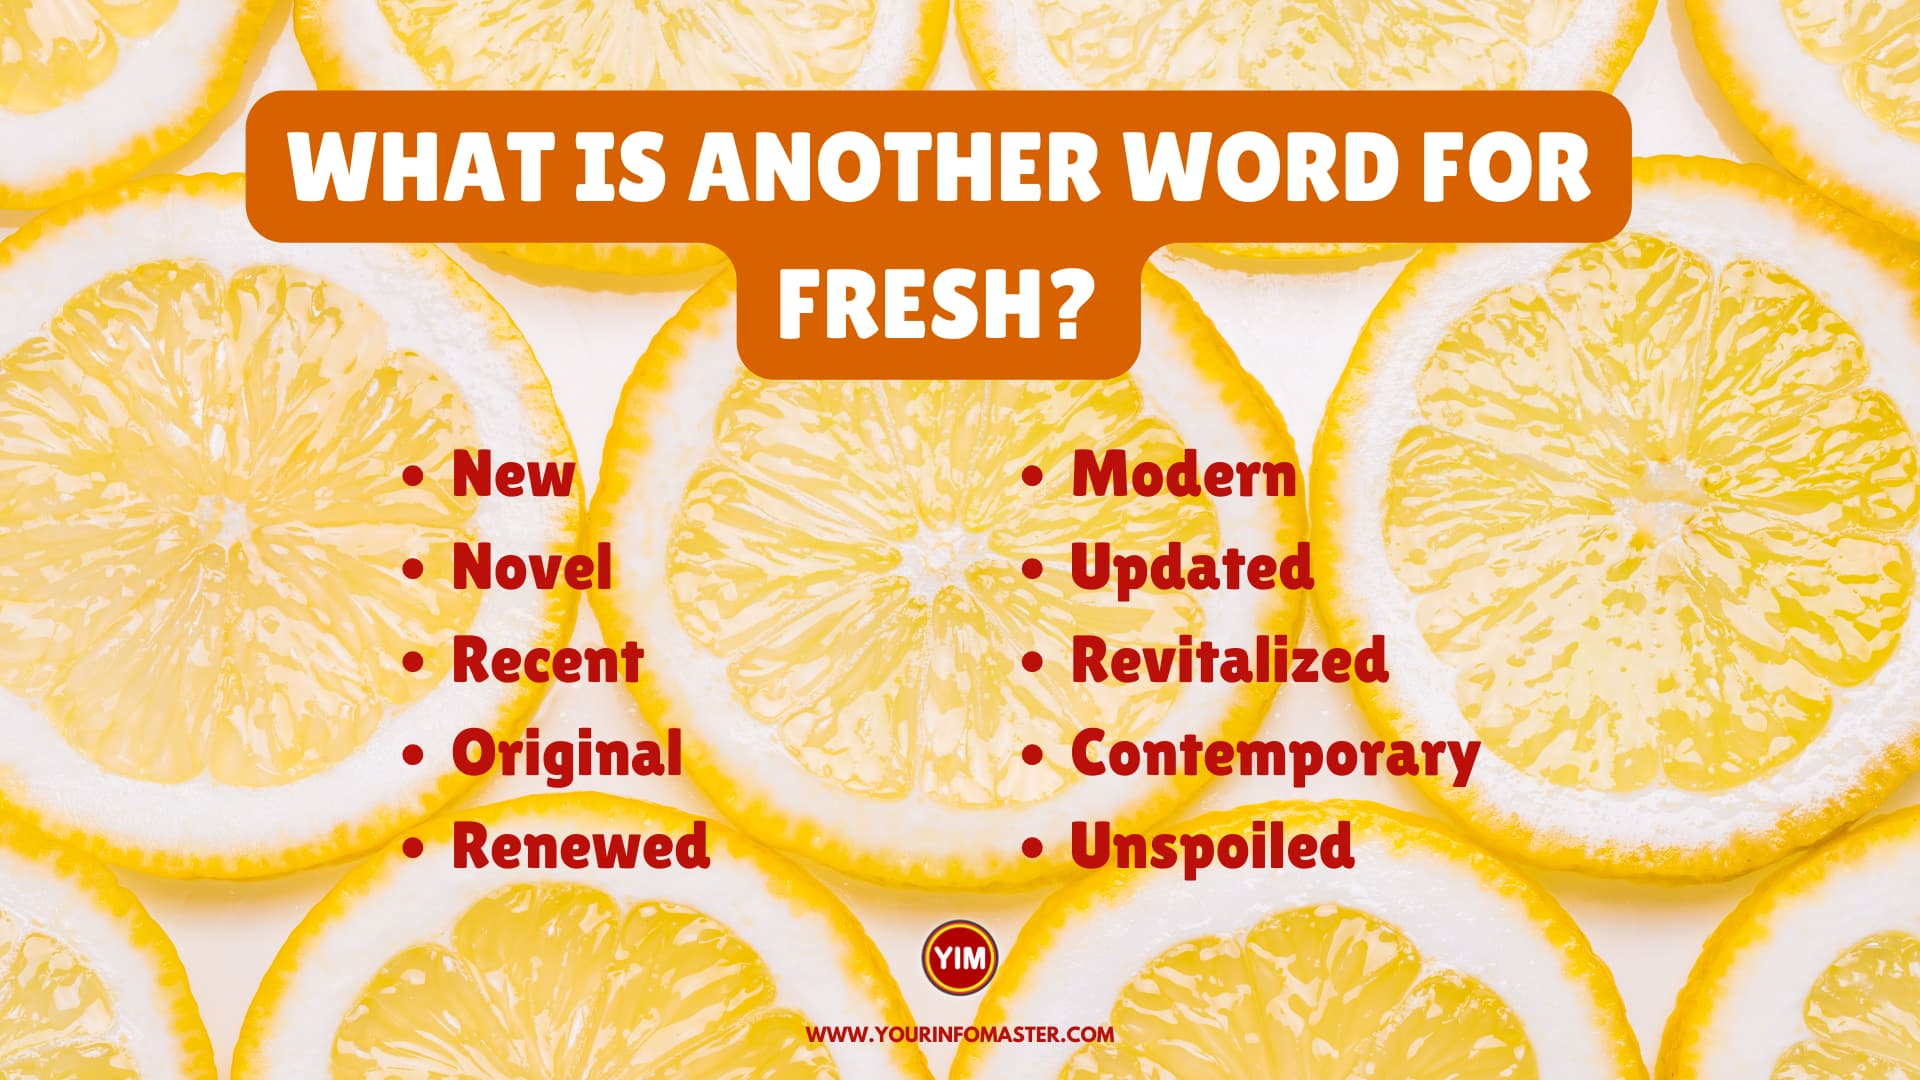 What is another word for Fresh